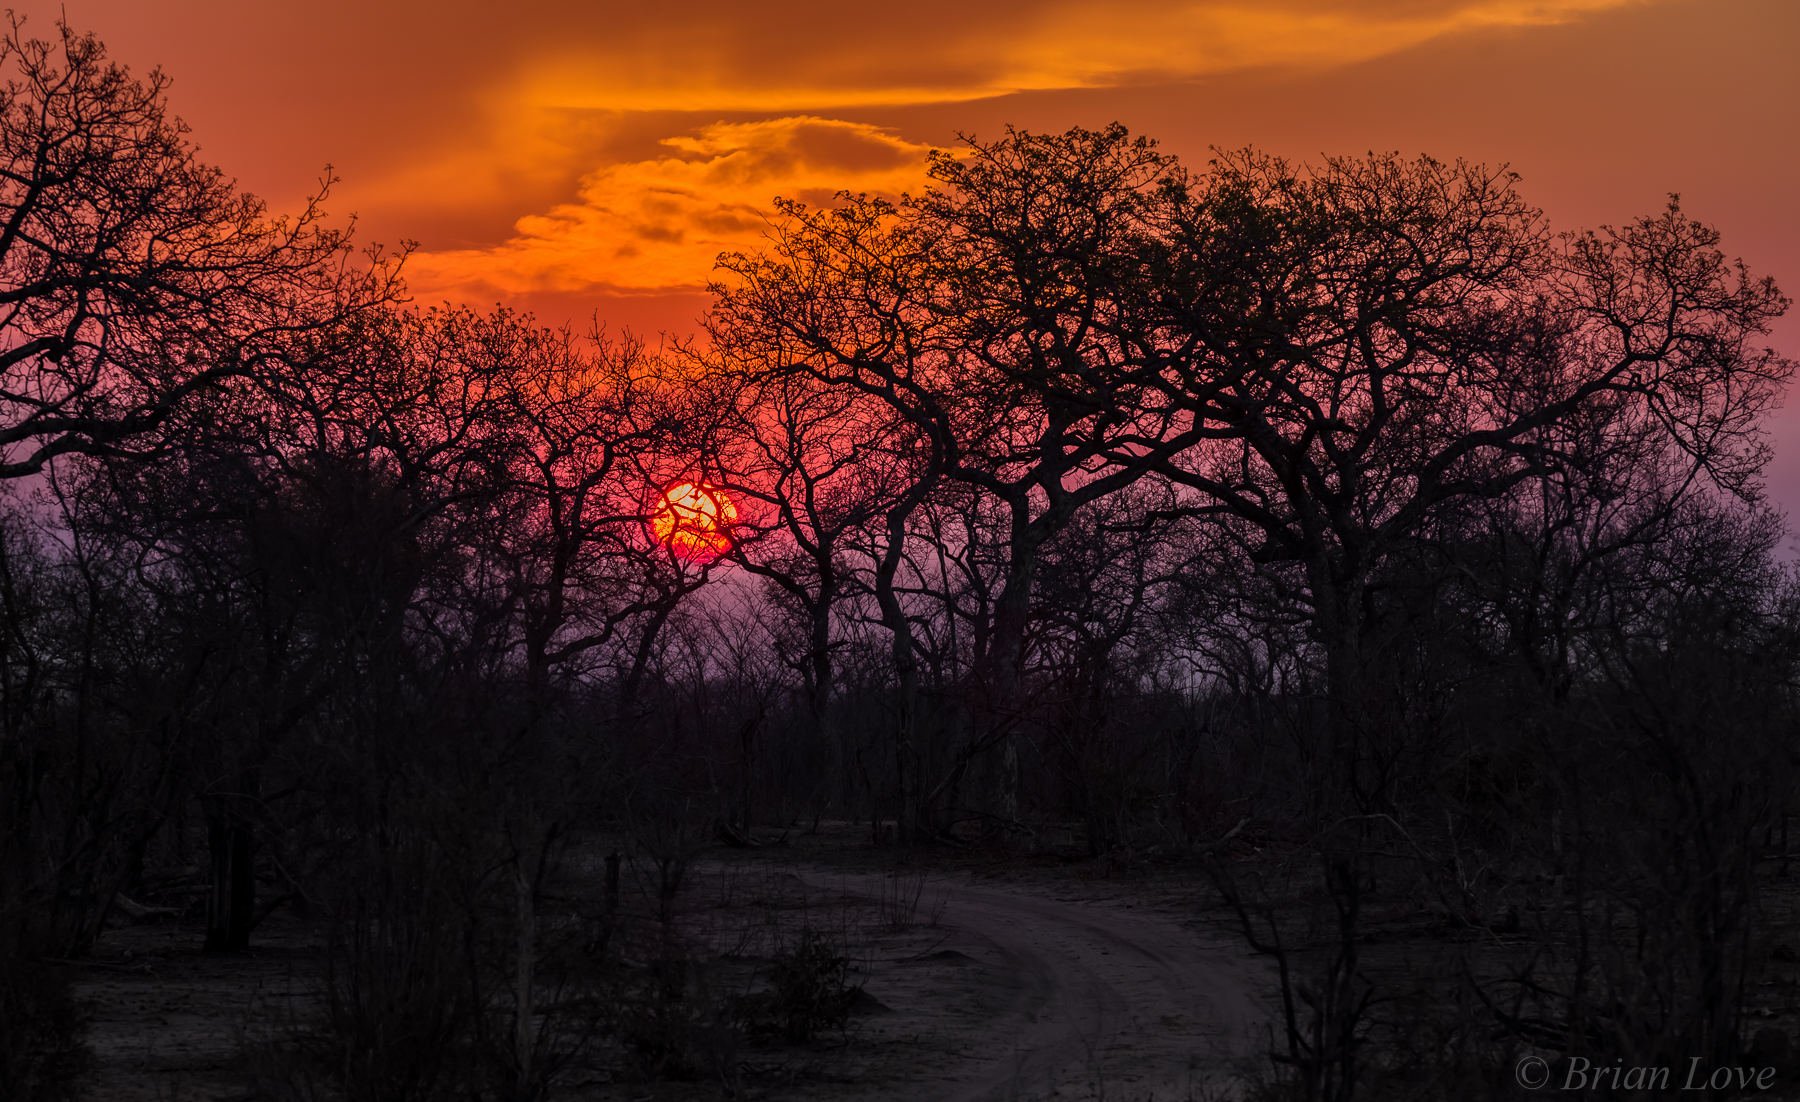 Sunset In The Dry Season South Africa...